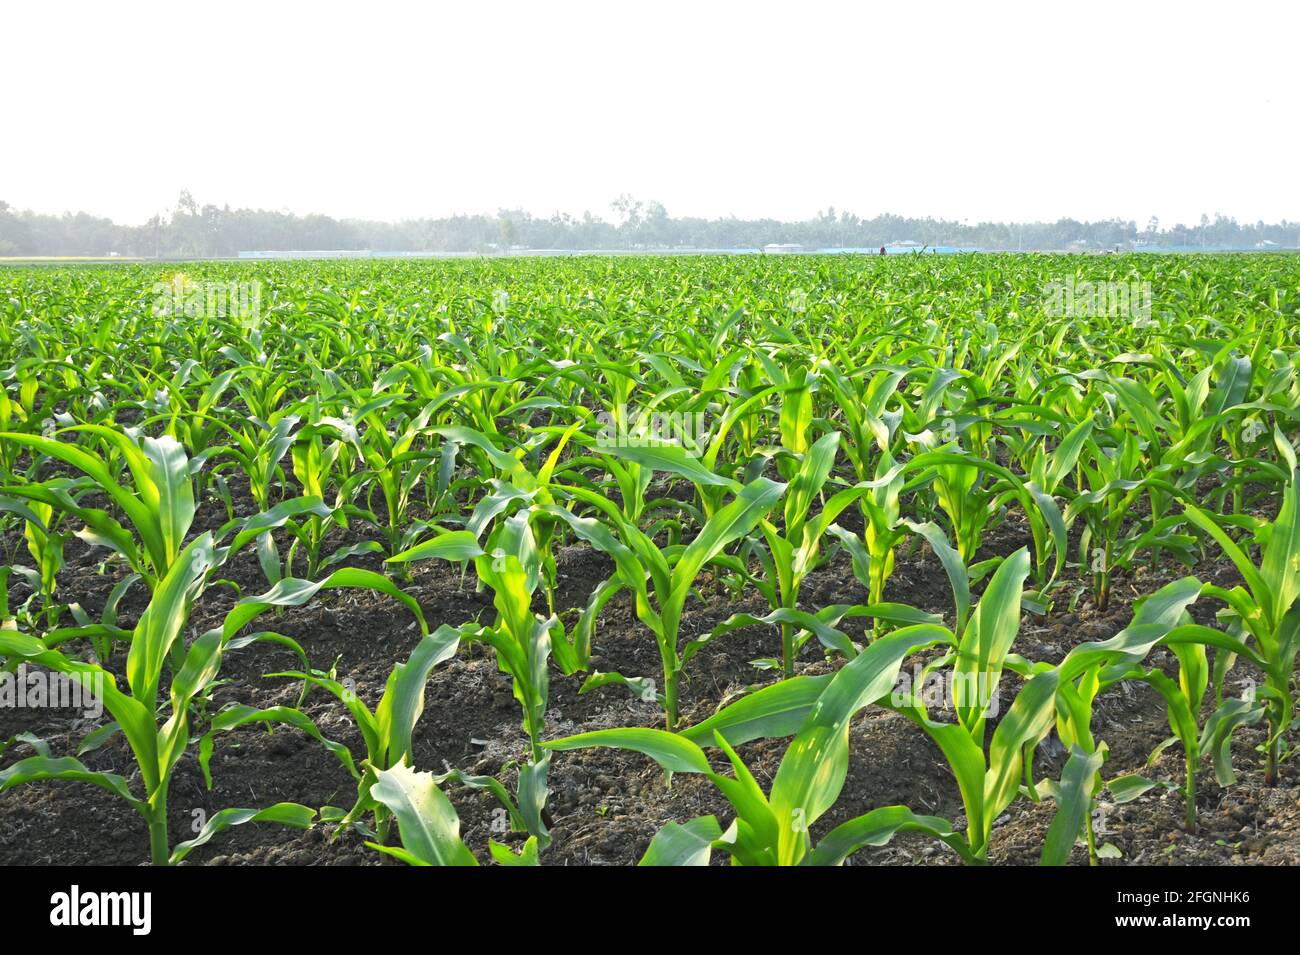 green maize field and natural area Stock Photo